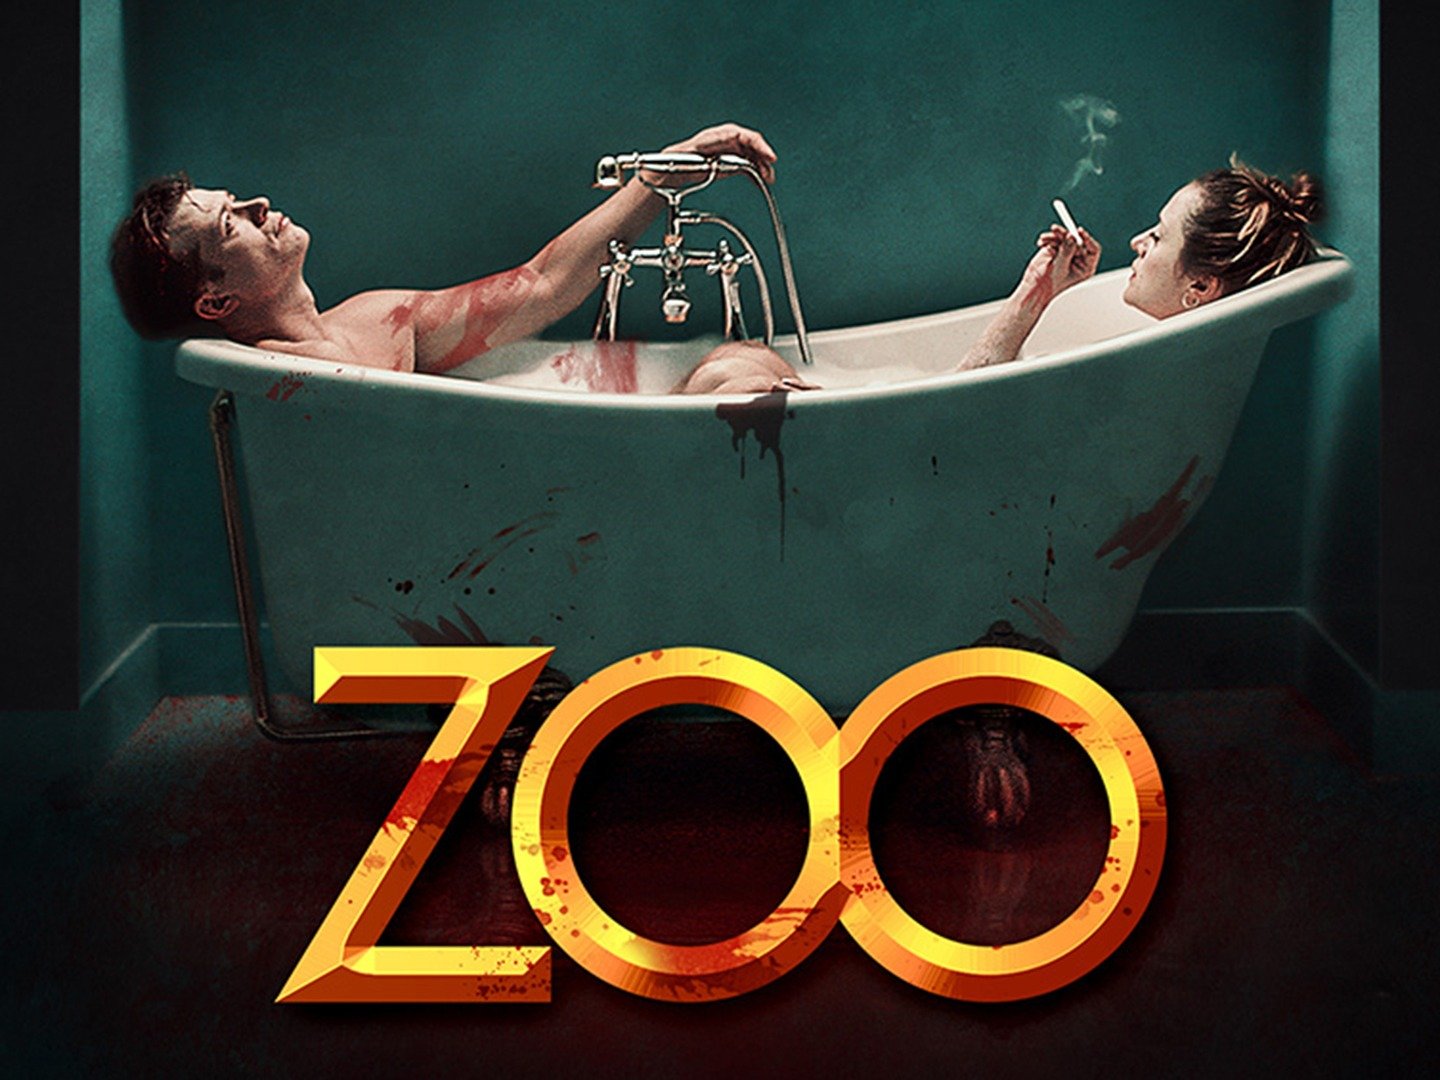 zoo 2018 movie review